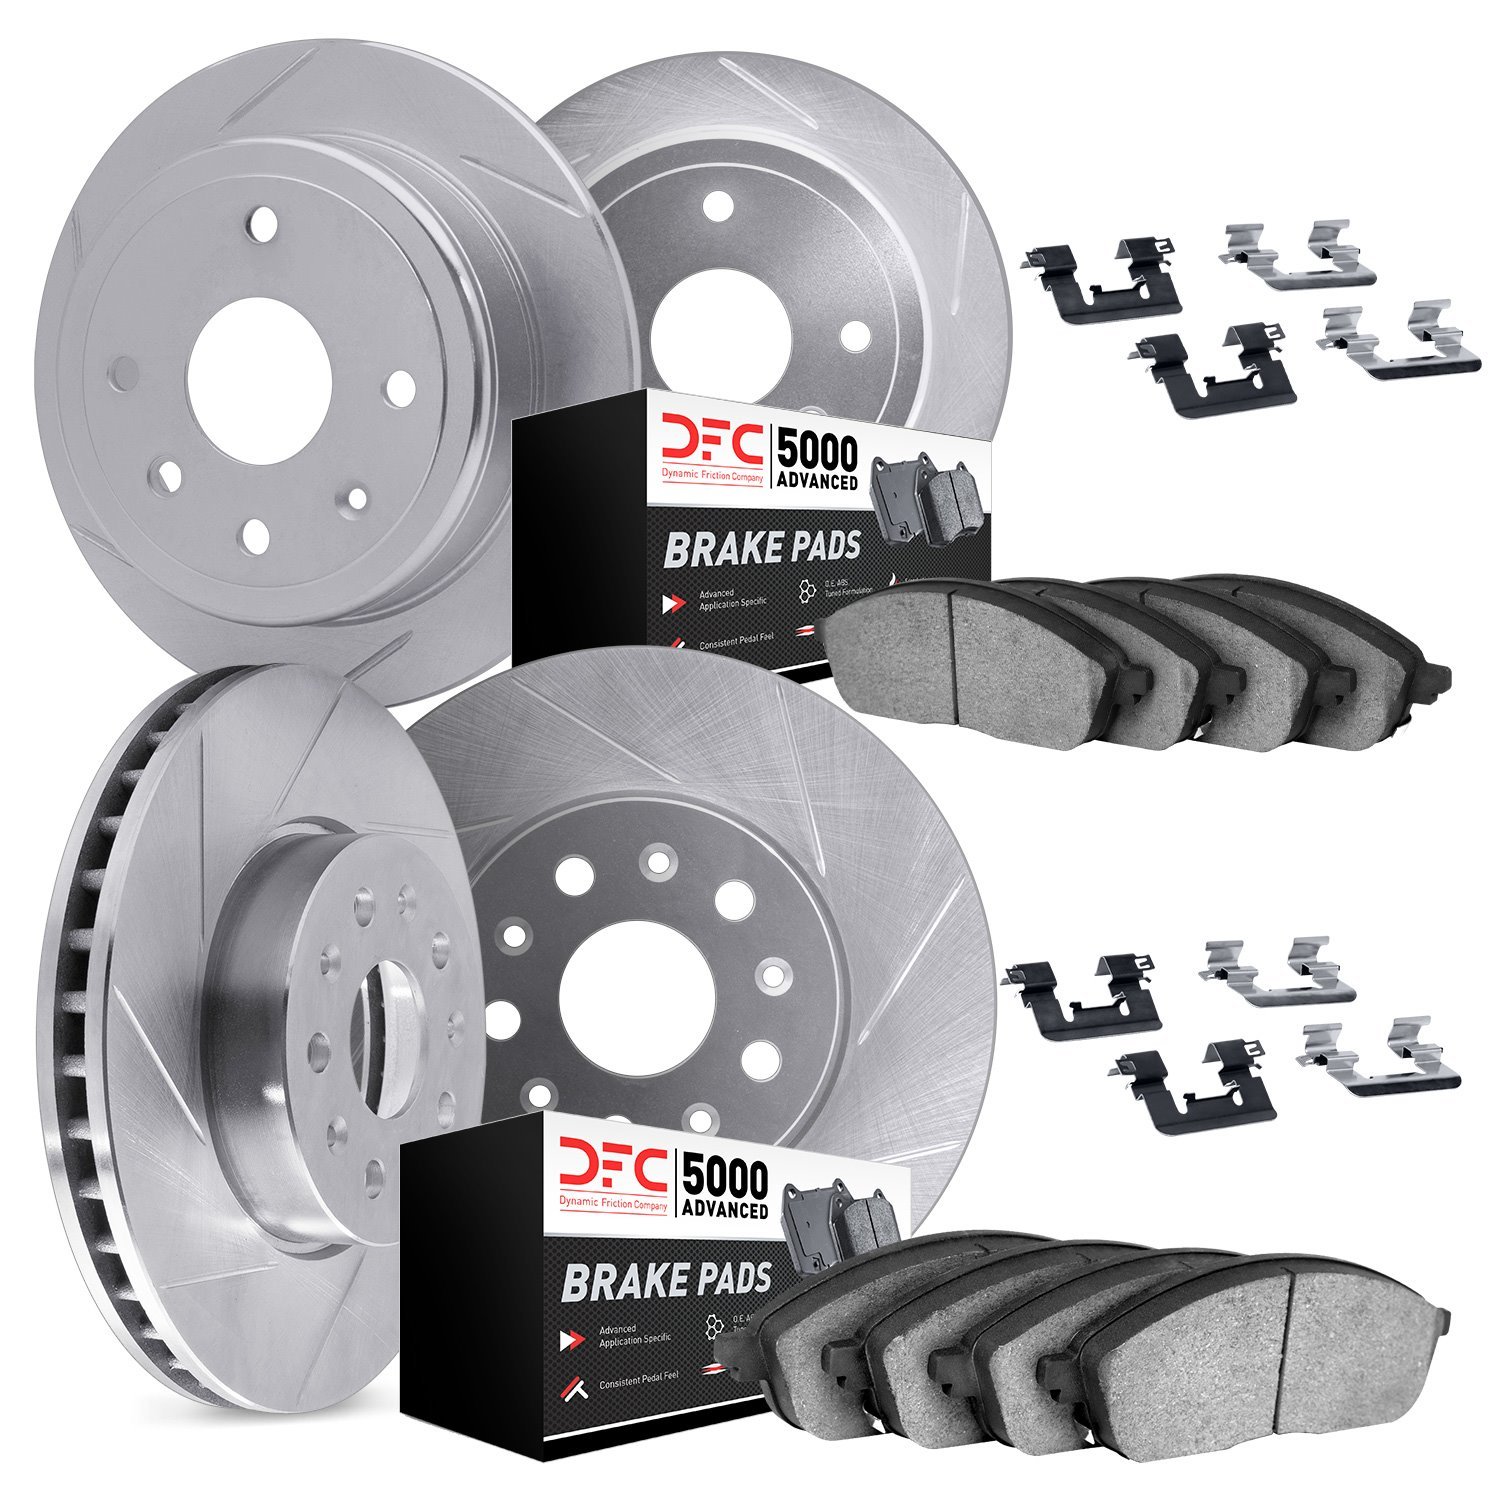 5514-11003 Slotted Brake Rotors w/5000 Advanced Brake Pads Kit & Hardware [Silver], 1990-1995 Land Rover, Position: Front and Re